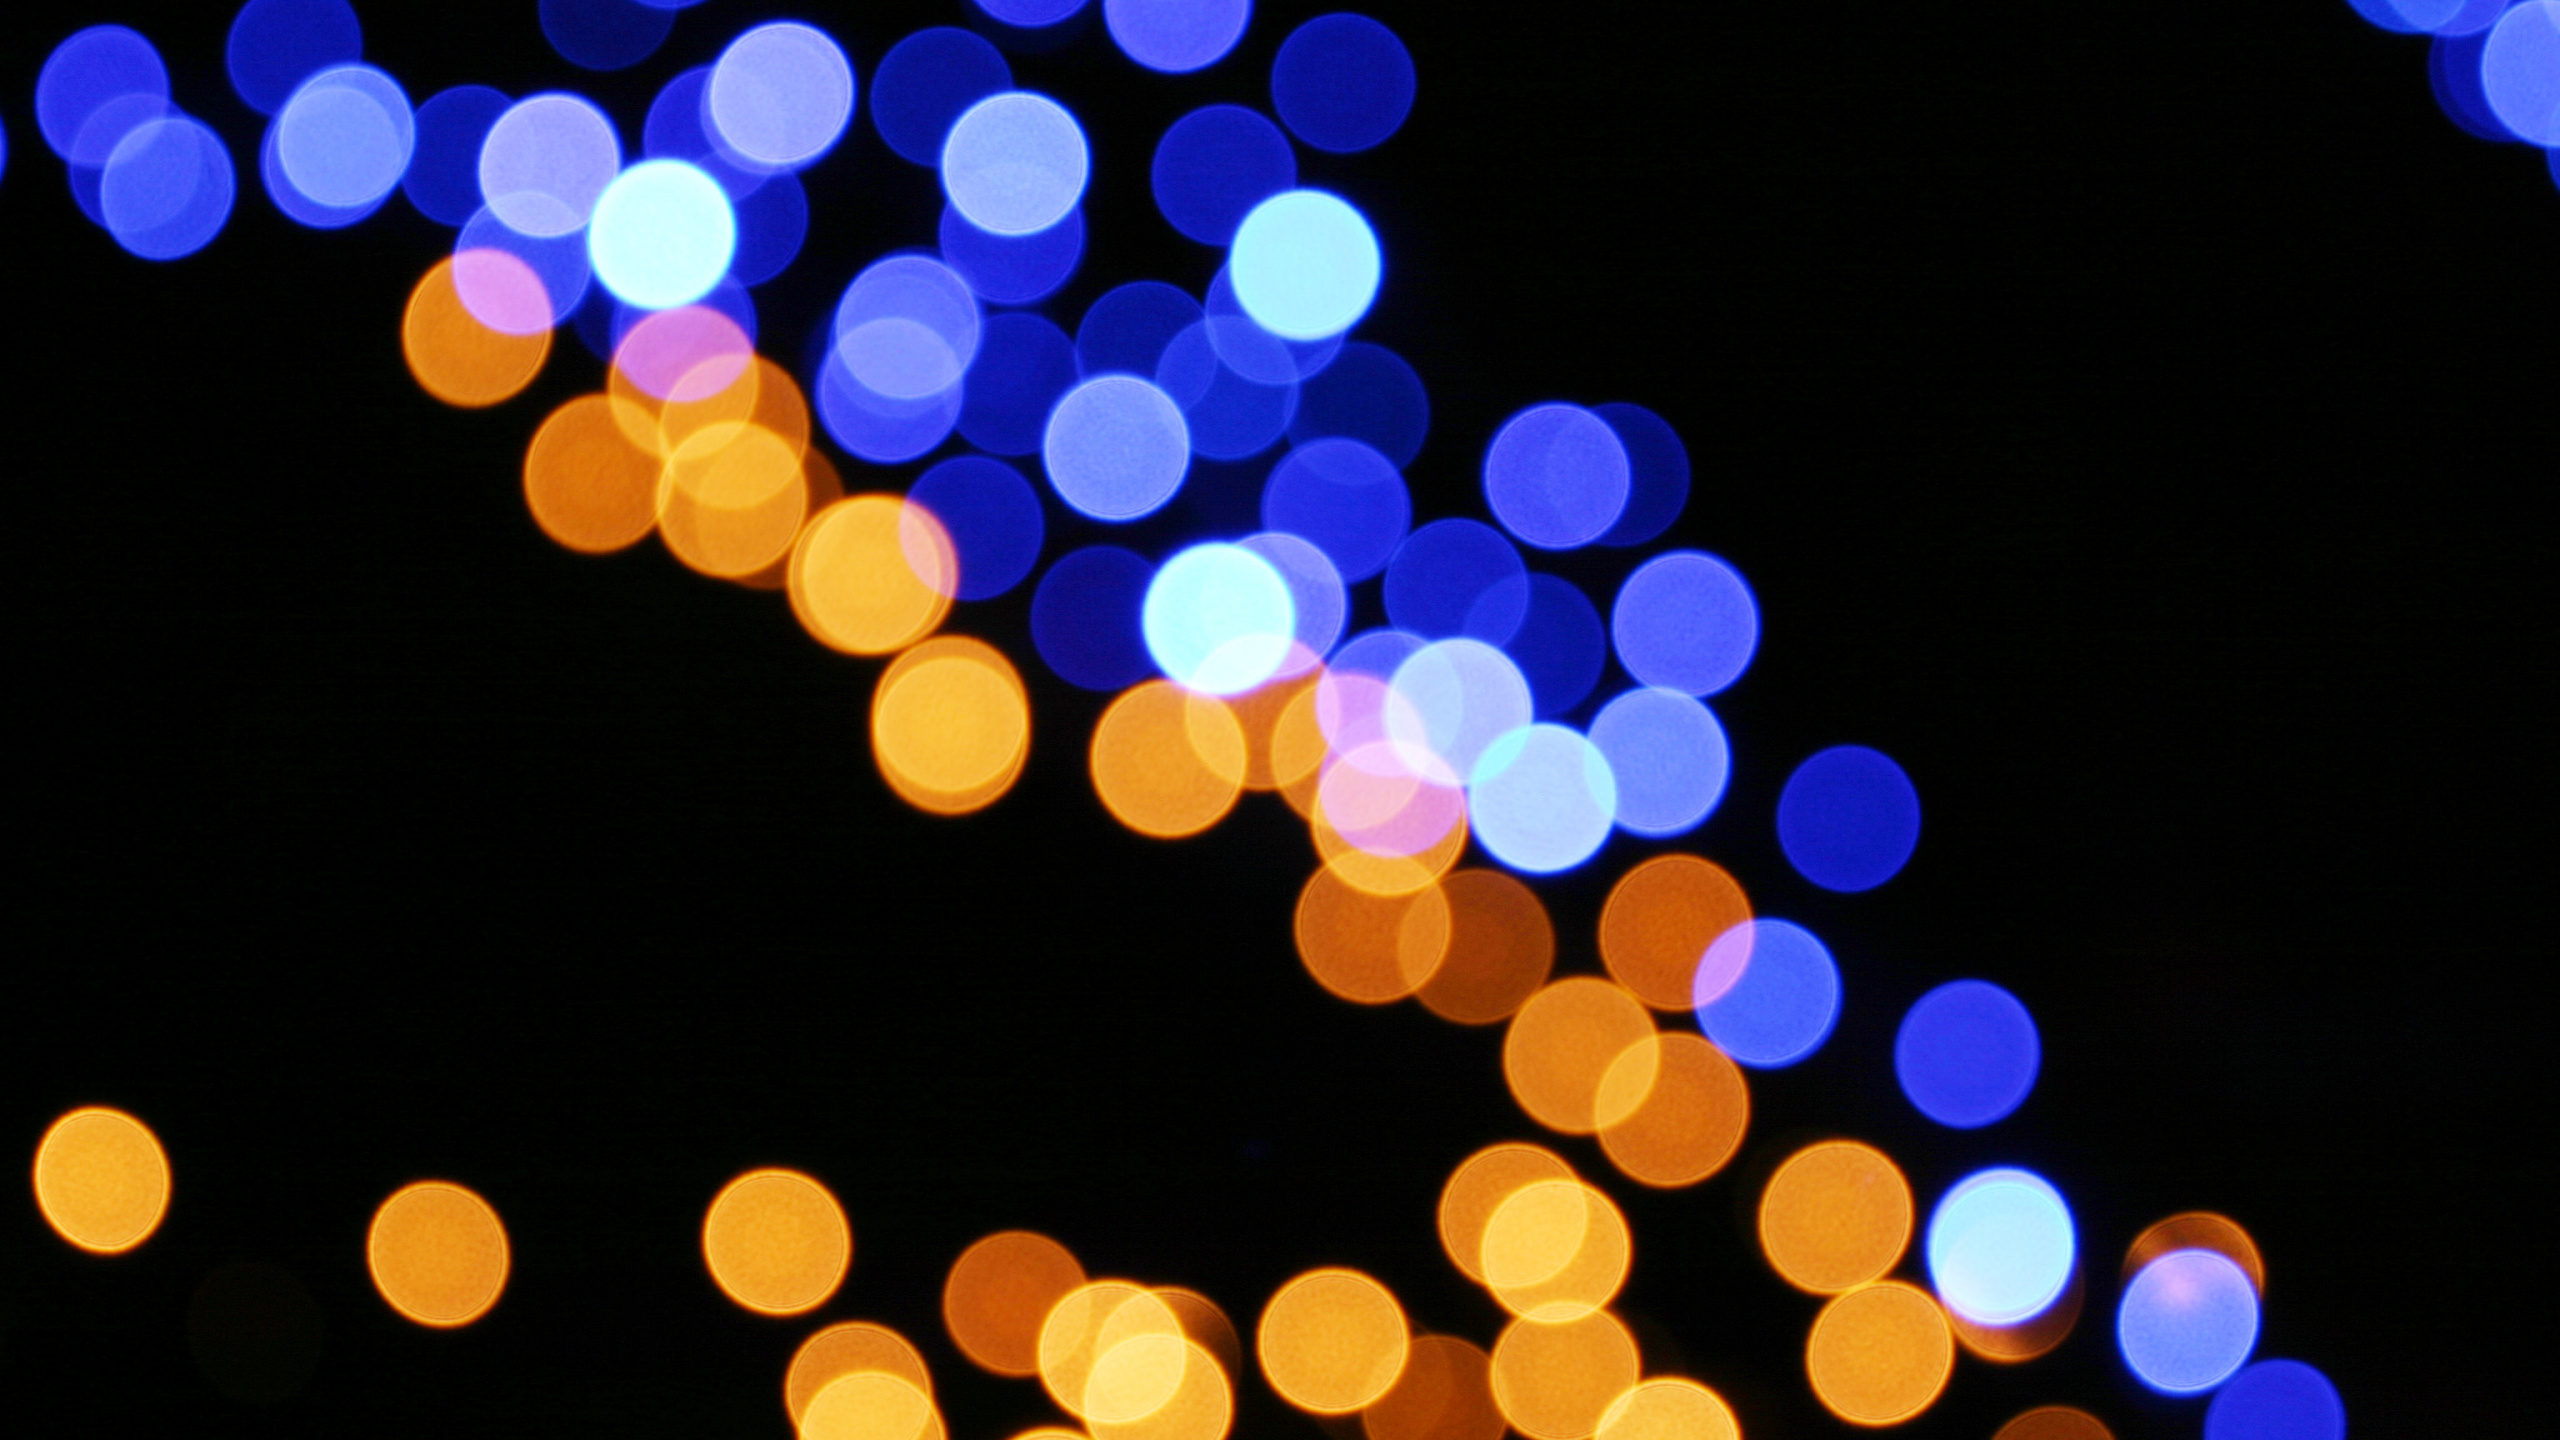 Blue and White Bokeh Lights. Wallpaper in 2560x1440 Resolution